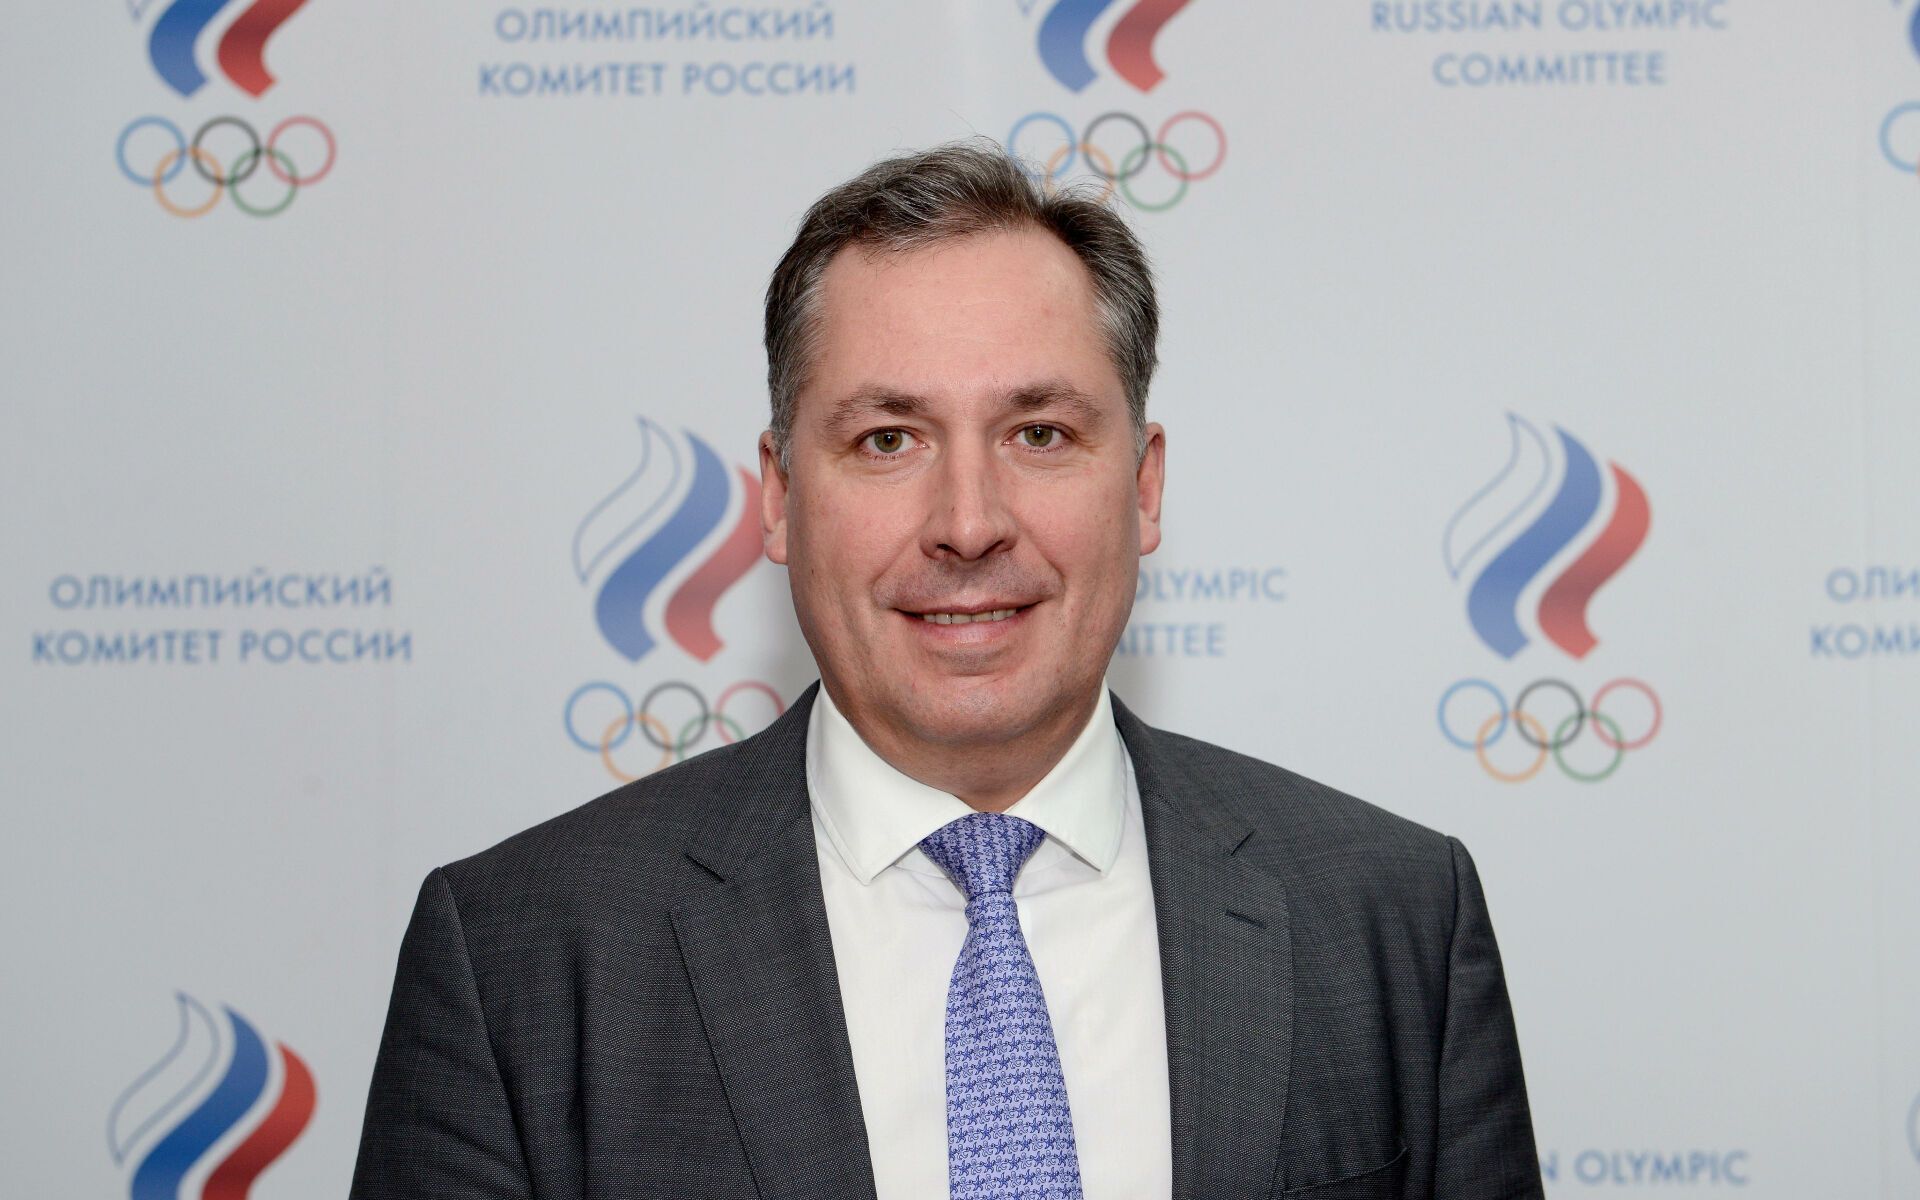 ''From the Looking Glass'': Russia accuses the IOC of supporting Ukraine, calling the war a ''political conflict''